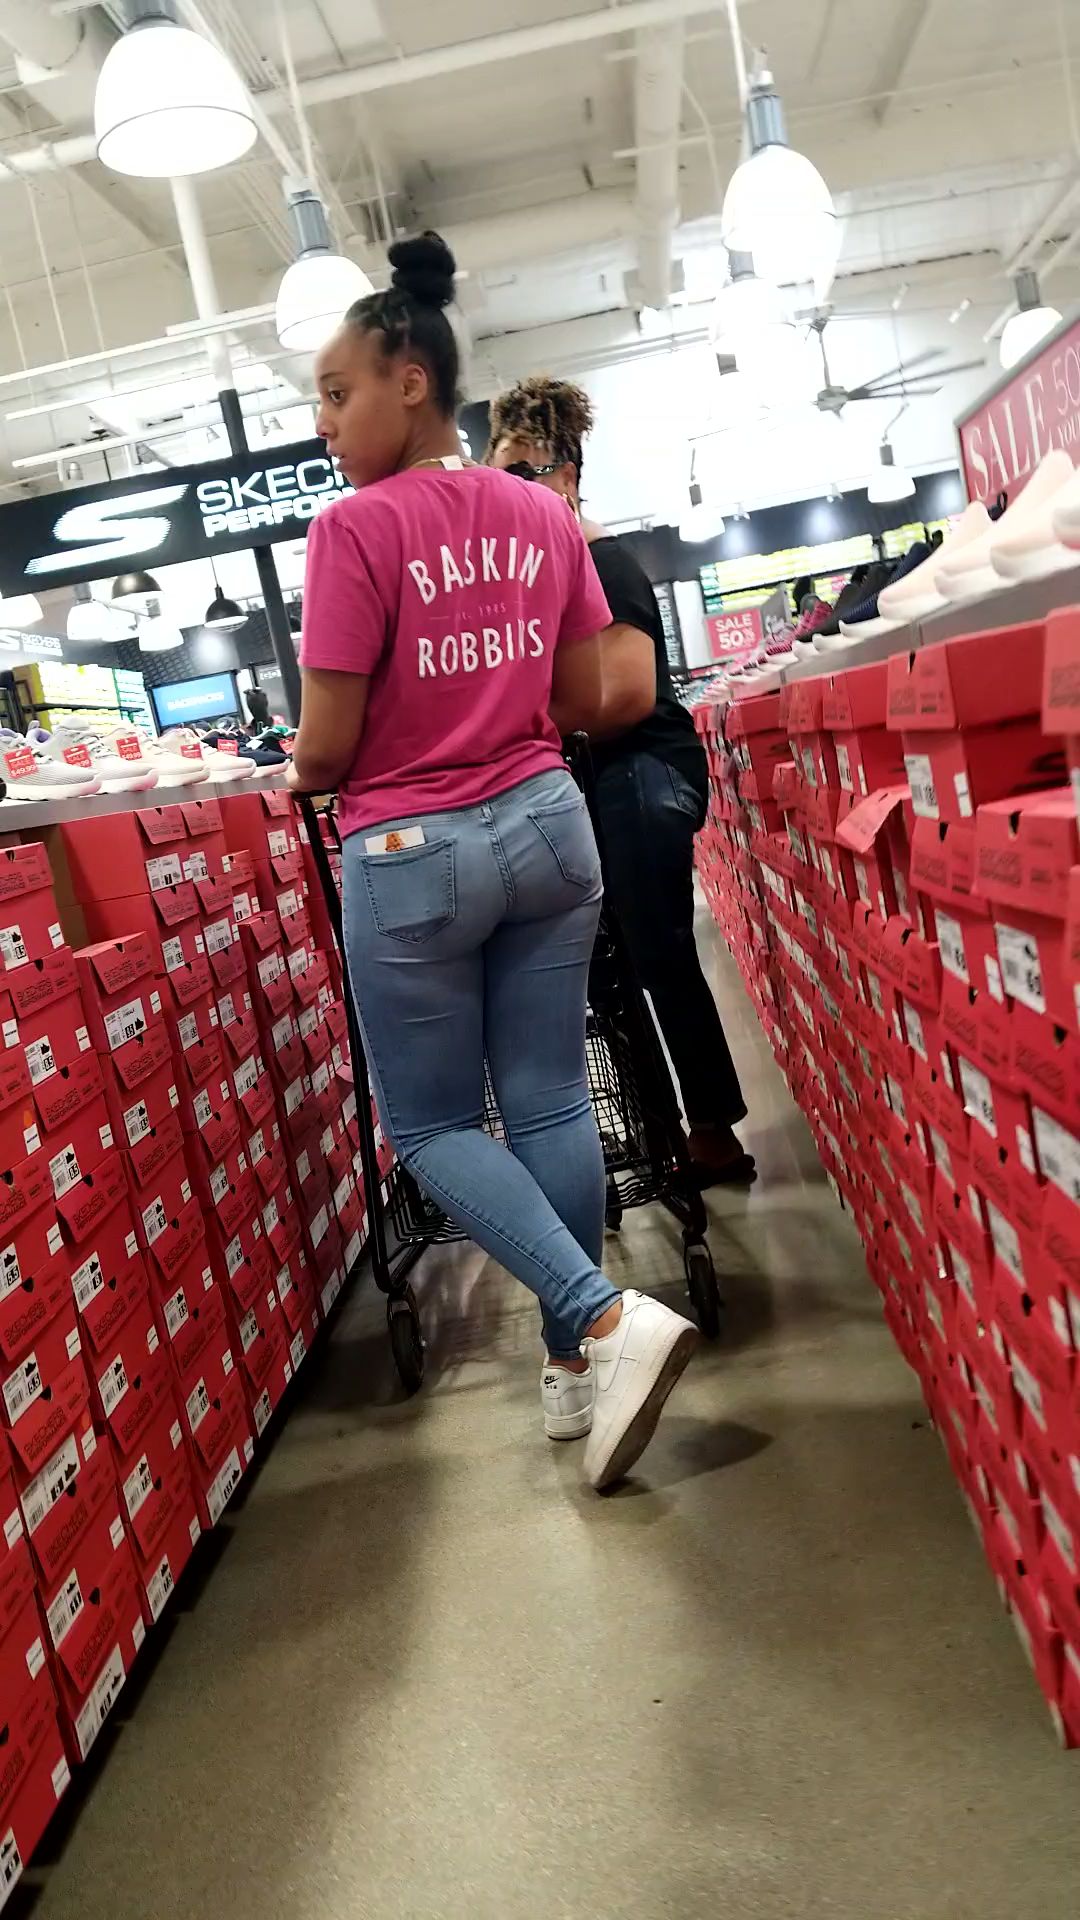 Candid Bbw Booty In Jeans – Great Porn Site Without Registration